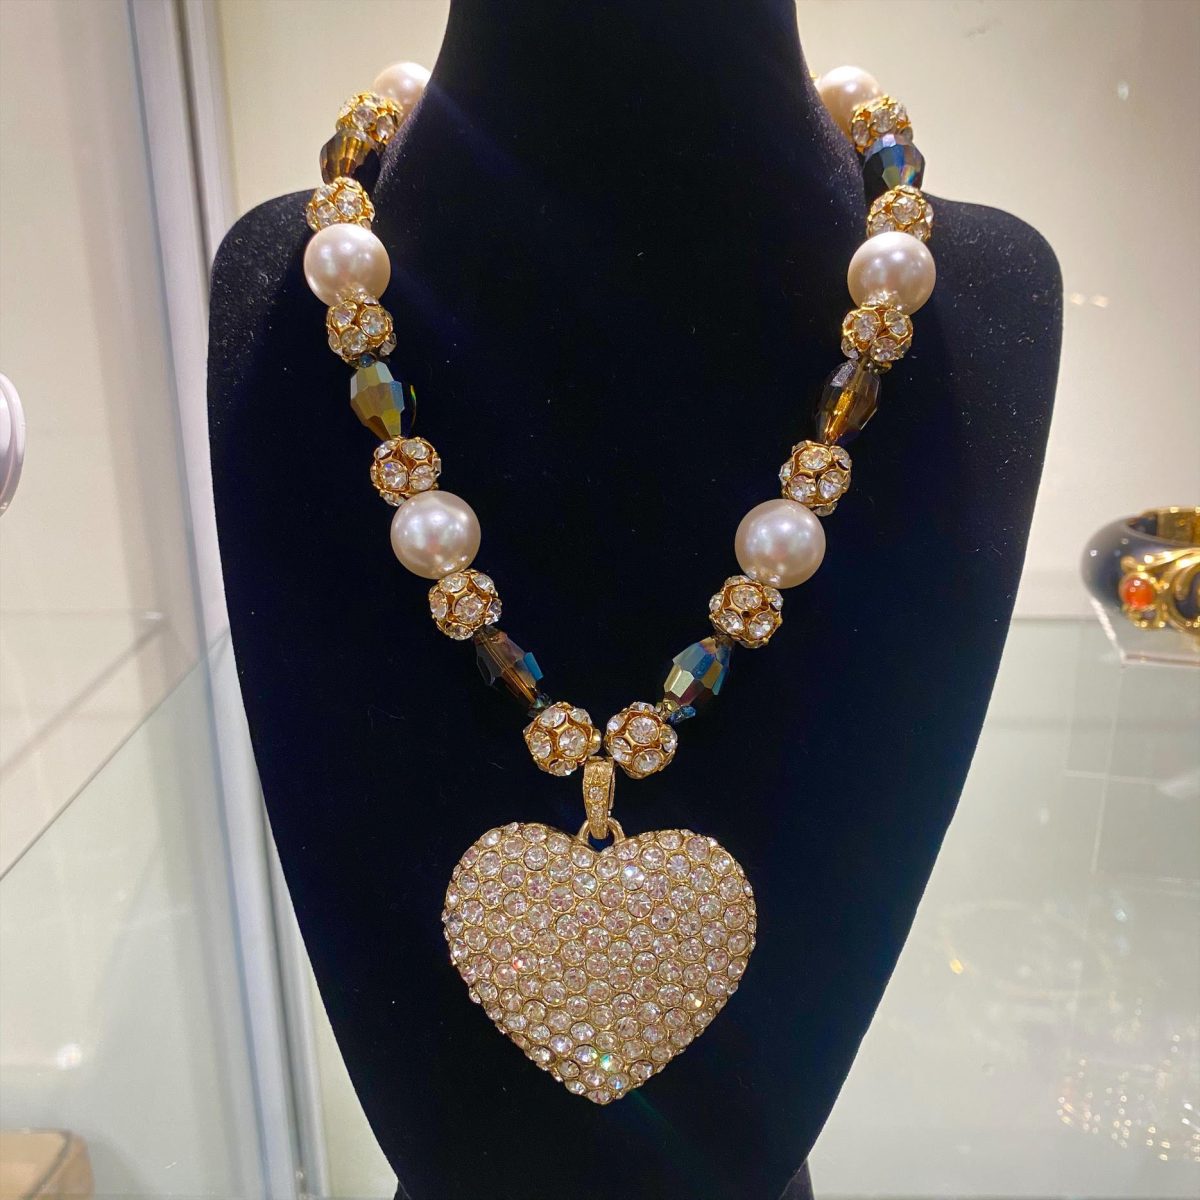 Heart Necklace from the collection of a couture fashion designer